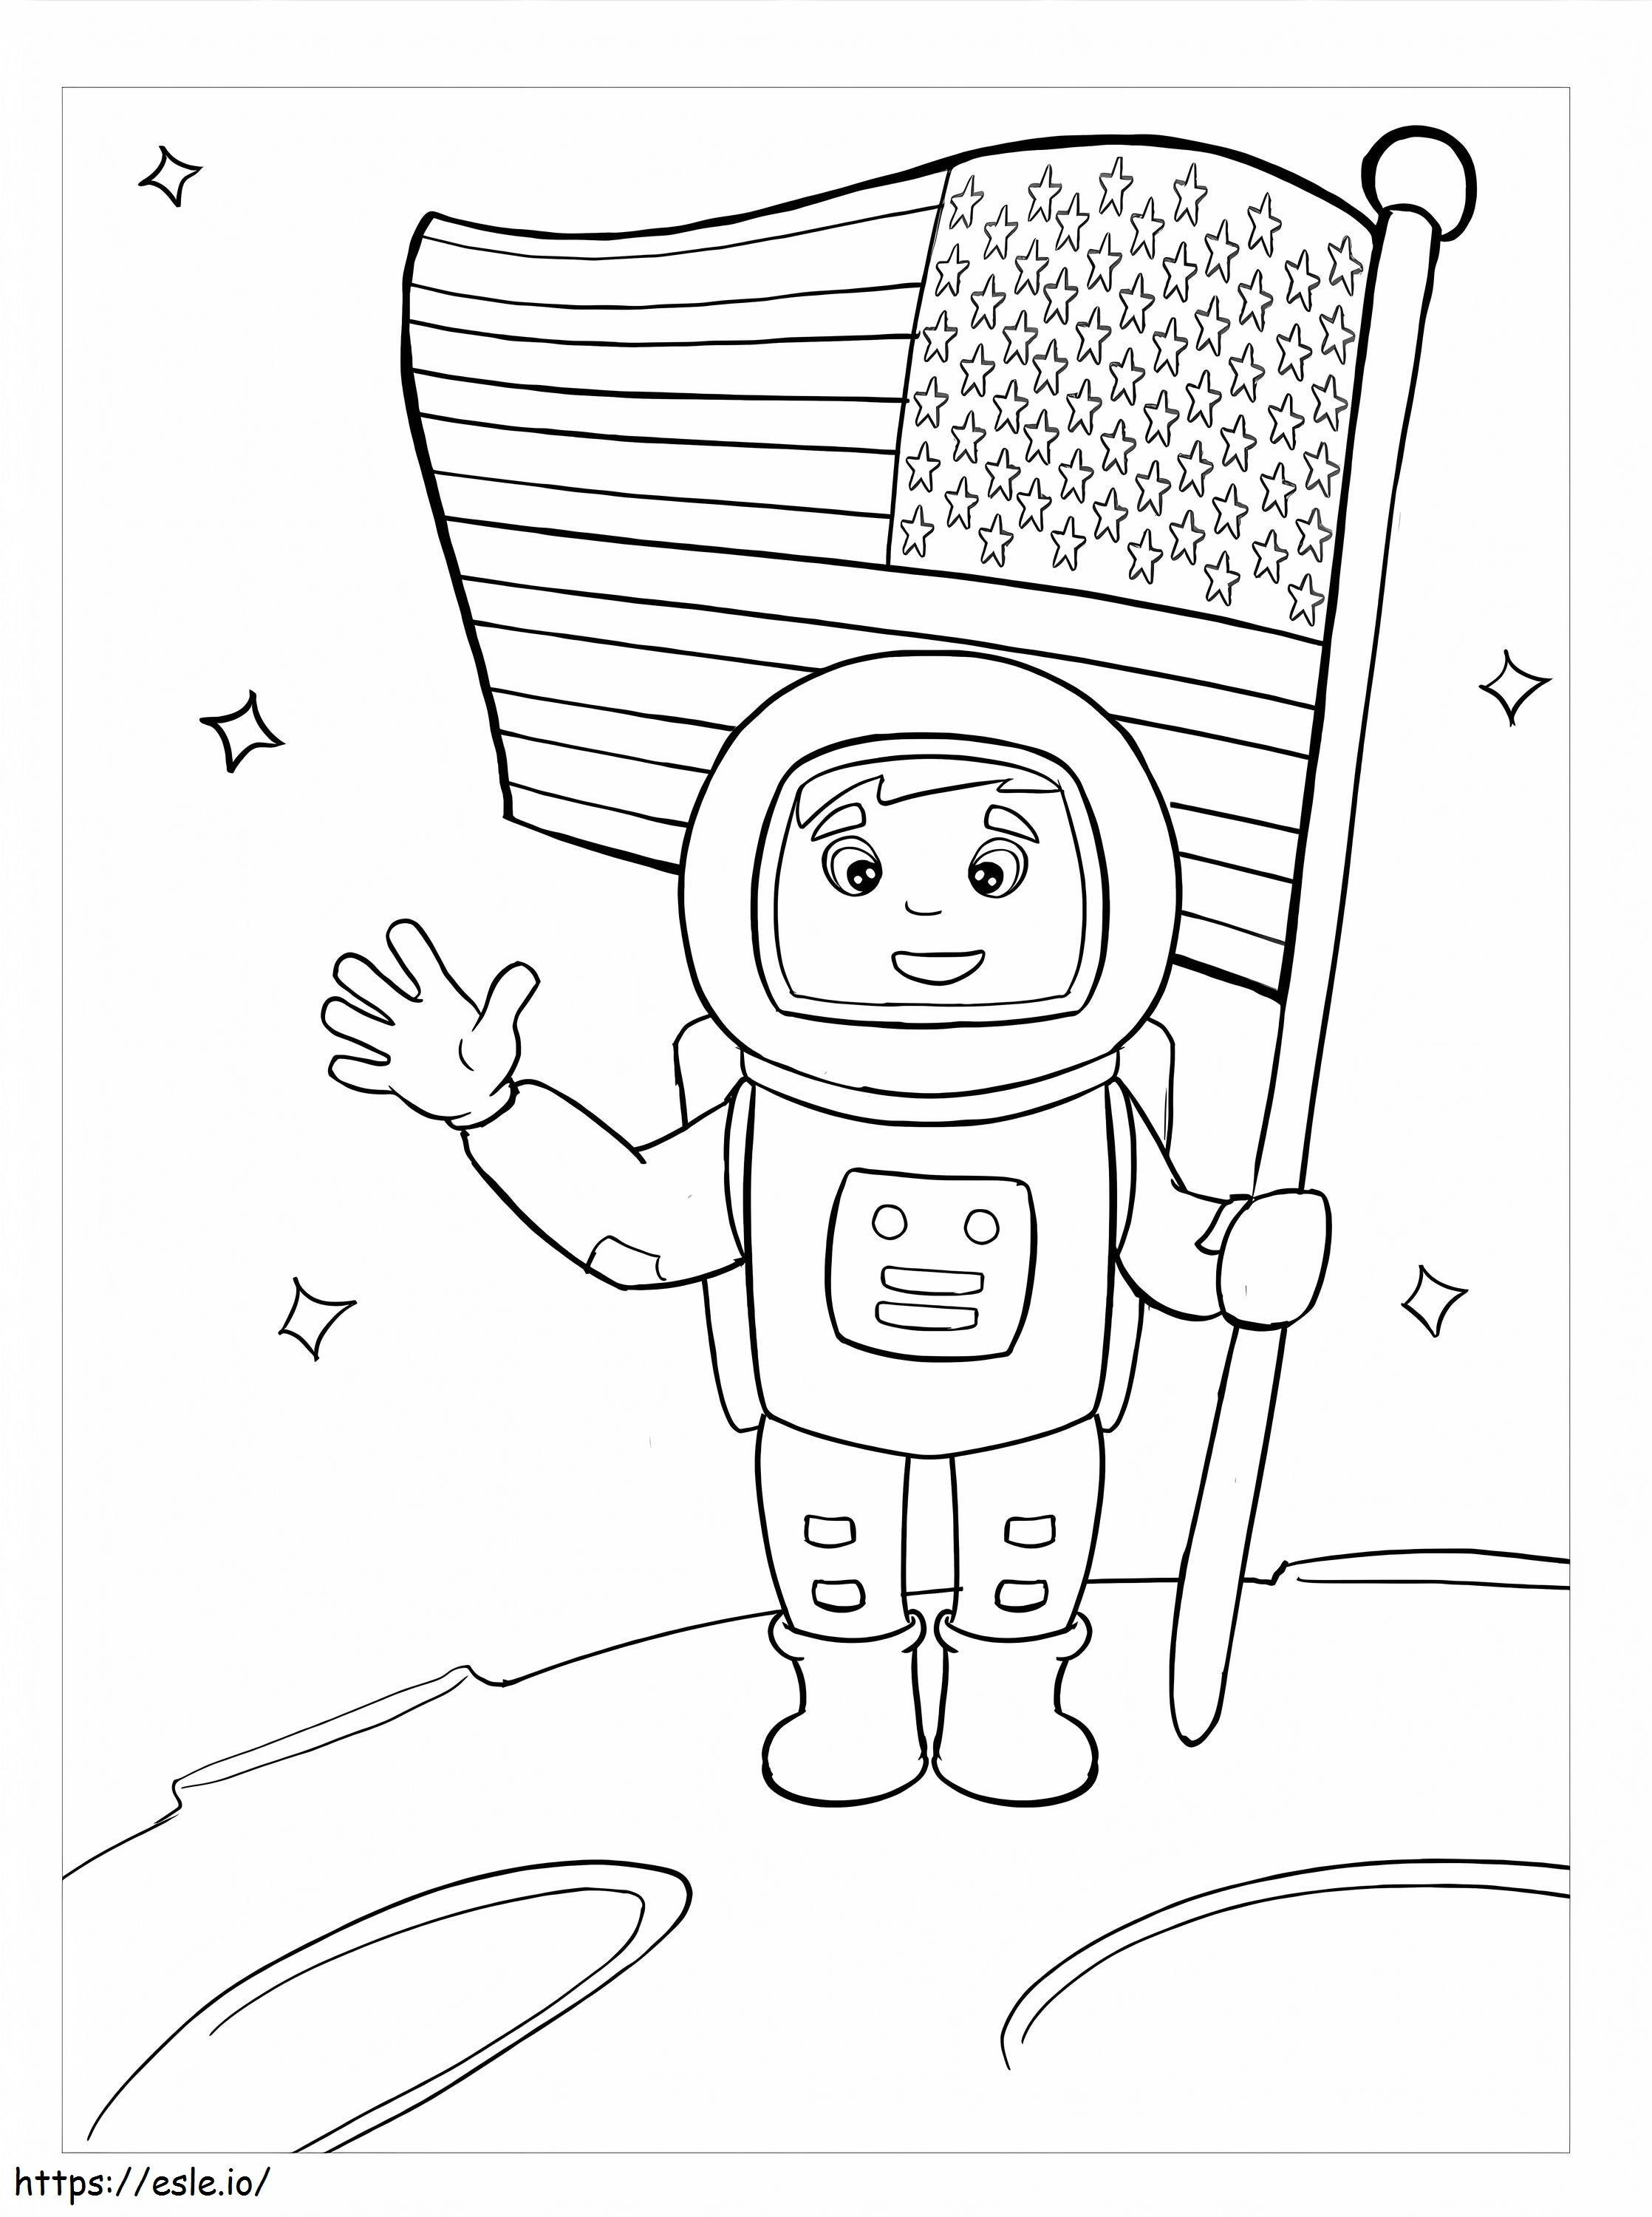 Astronaut With American Flag coloring page